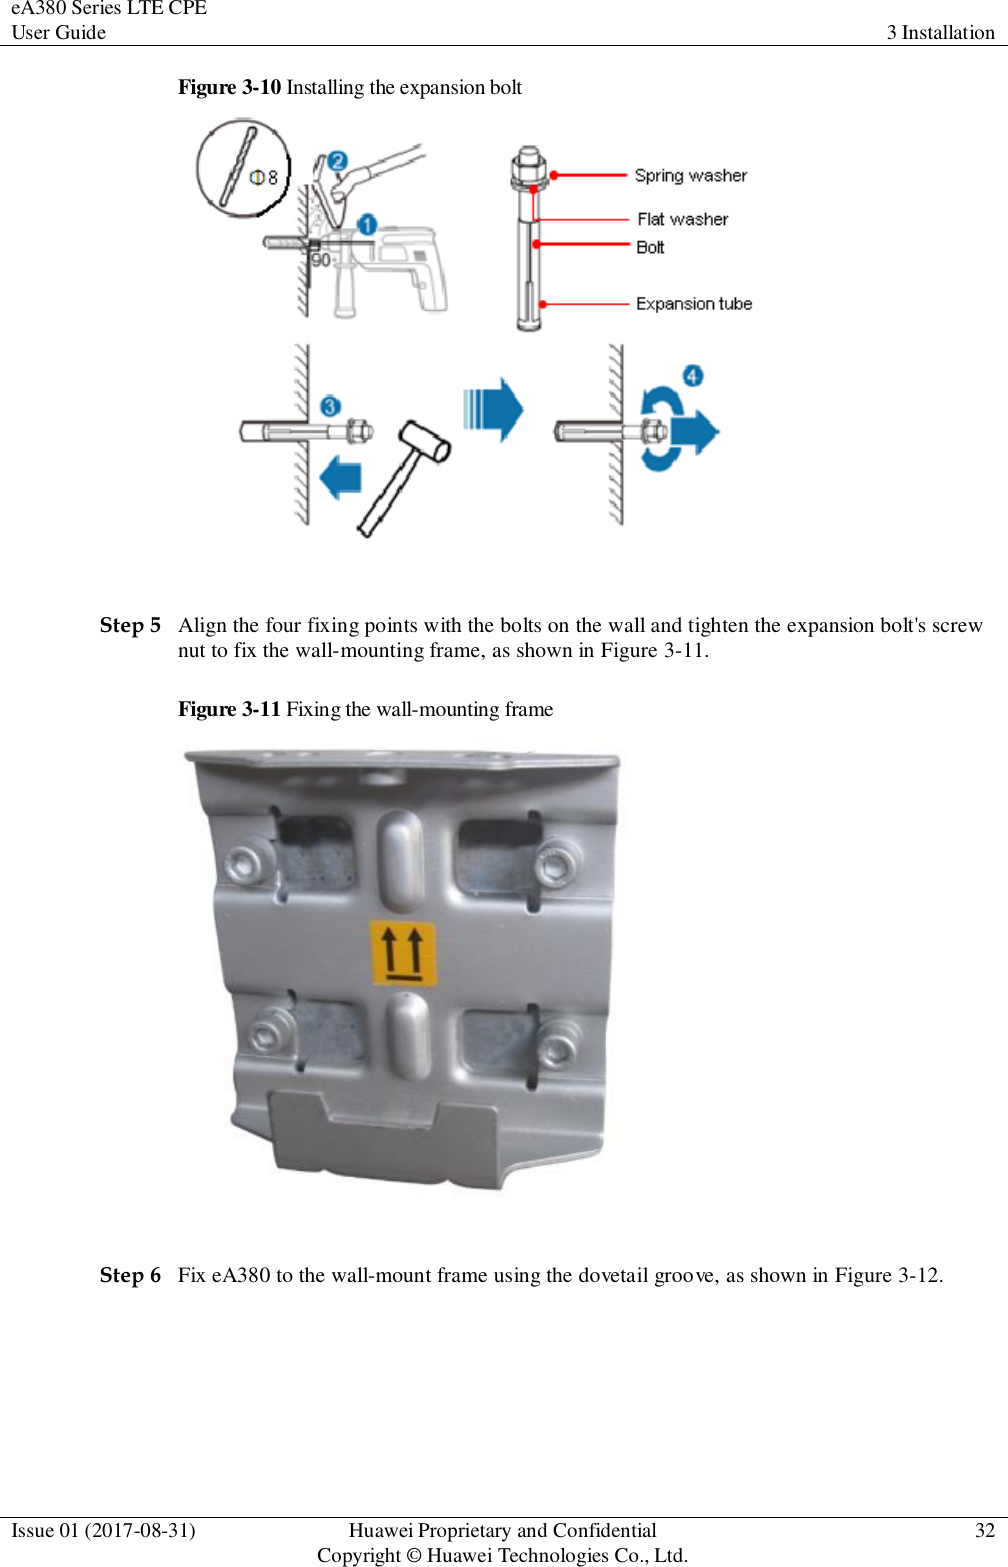 eA380 Series LTE CPE User Guide 3 Installation  Issue 01 (2017-08-31) Huawei Proprietary and Confidential                                     Copyright © Huawei Technologies Co., Ltd. 32  Figure 3-10 Installing the expansion bolt   Step 5 Align the four fixing points with the bolts on the wall and tighten the expansion bolt&apos;s screw nut to fix the wall-mounting frame, as shown in Figure 3-11. Figure 3-11 Fixing the wall-mounting frame   Step 6 Fix eA380 to the wall-mount frame using the dovetail groove, as shown in Figure 3-12. 